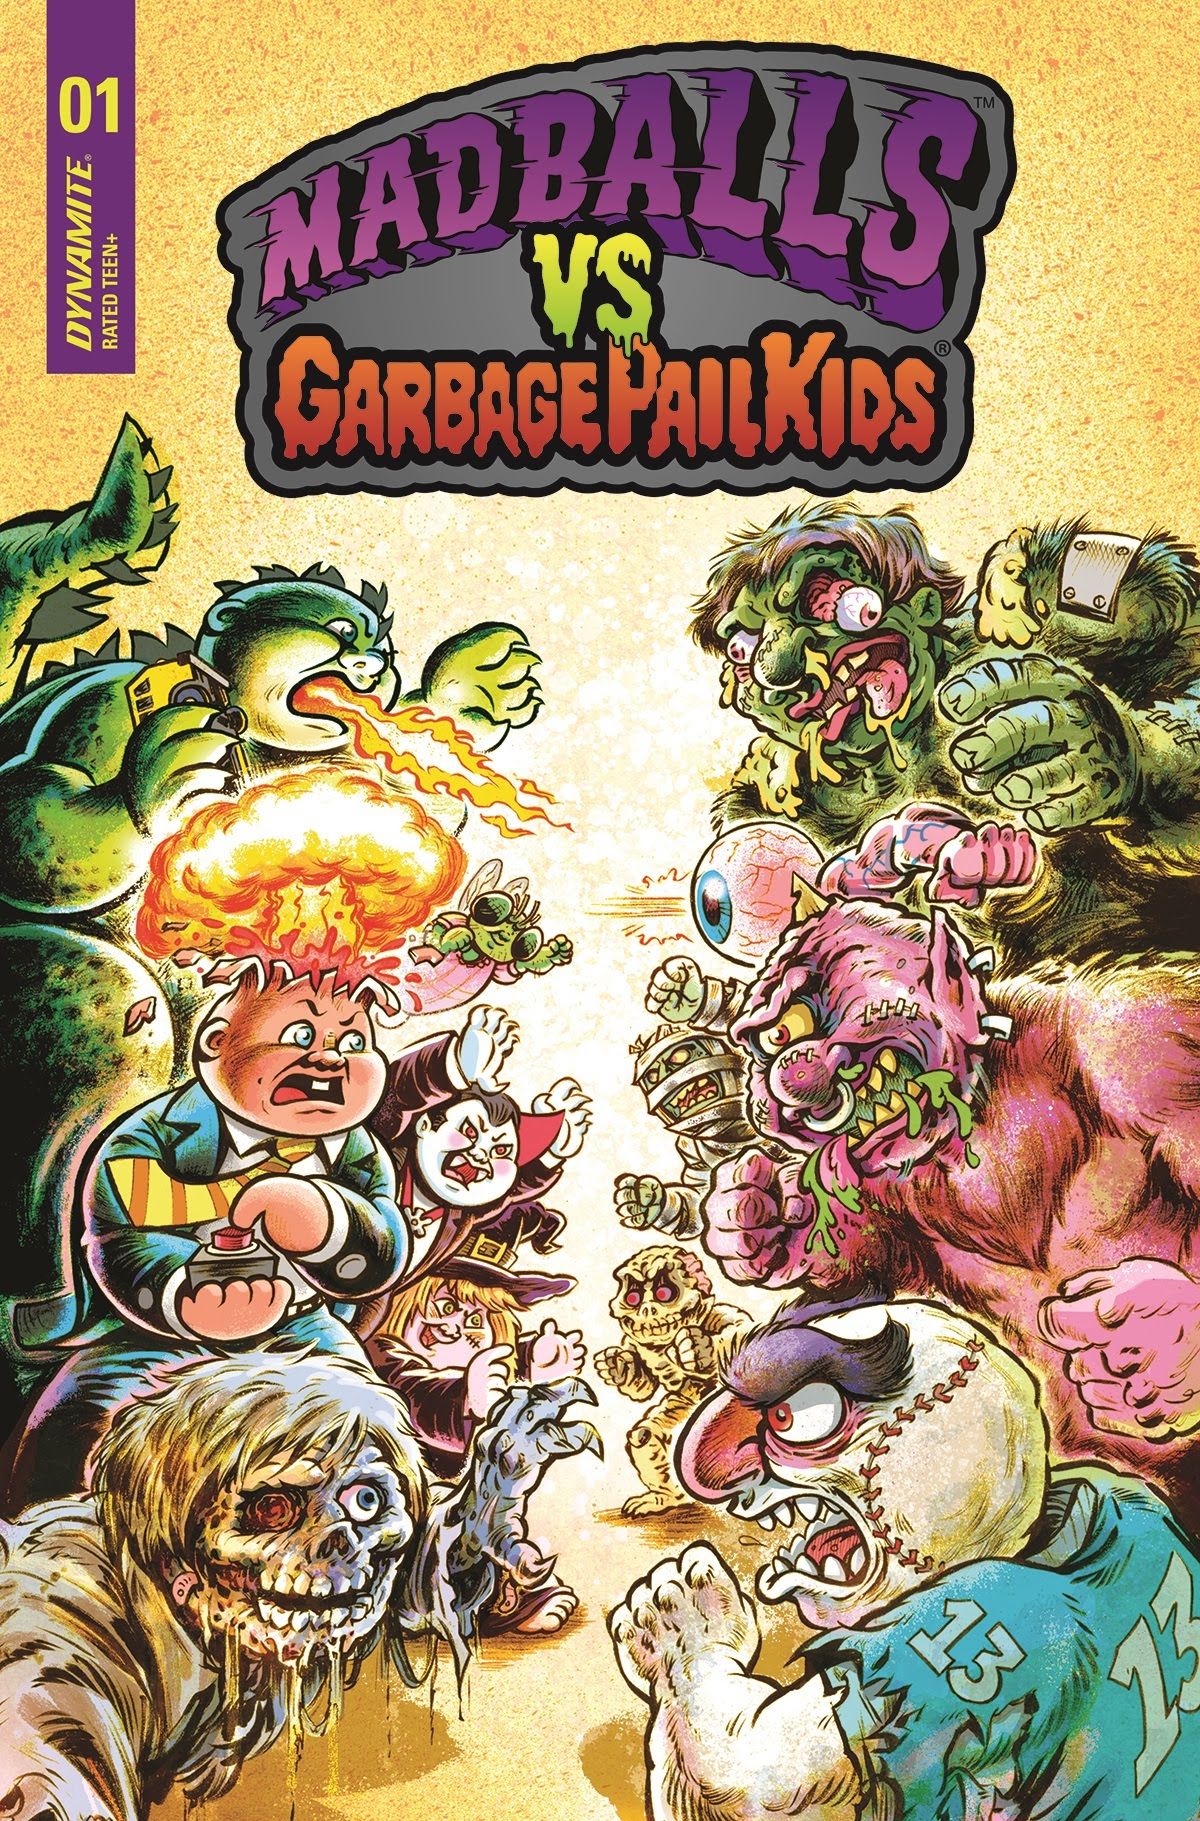 '80s Icons Madballs and Garbage Pail Kids Go to War in New Crossover Series